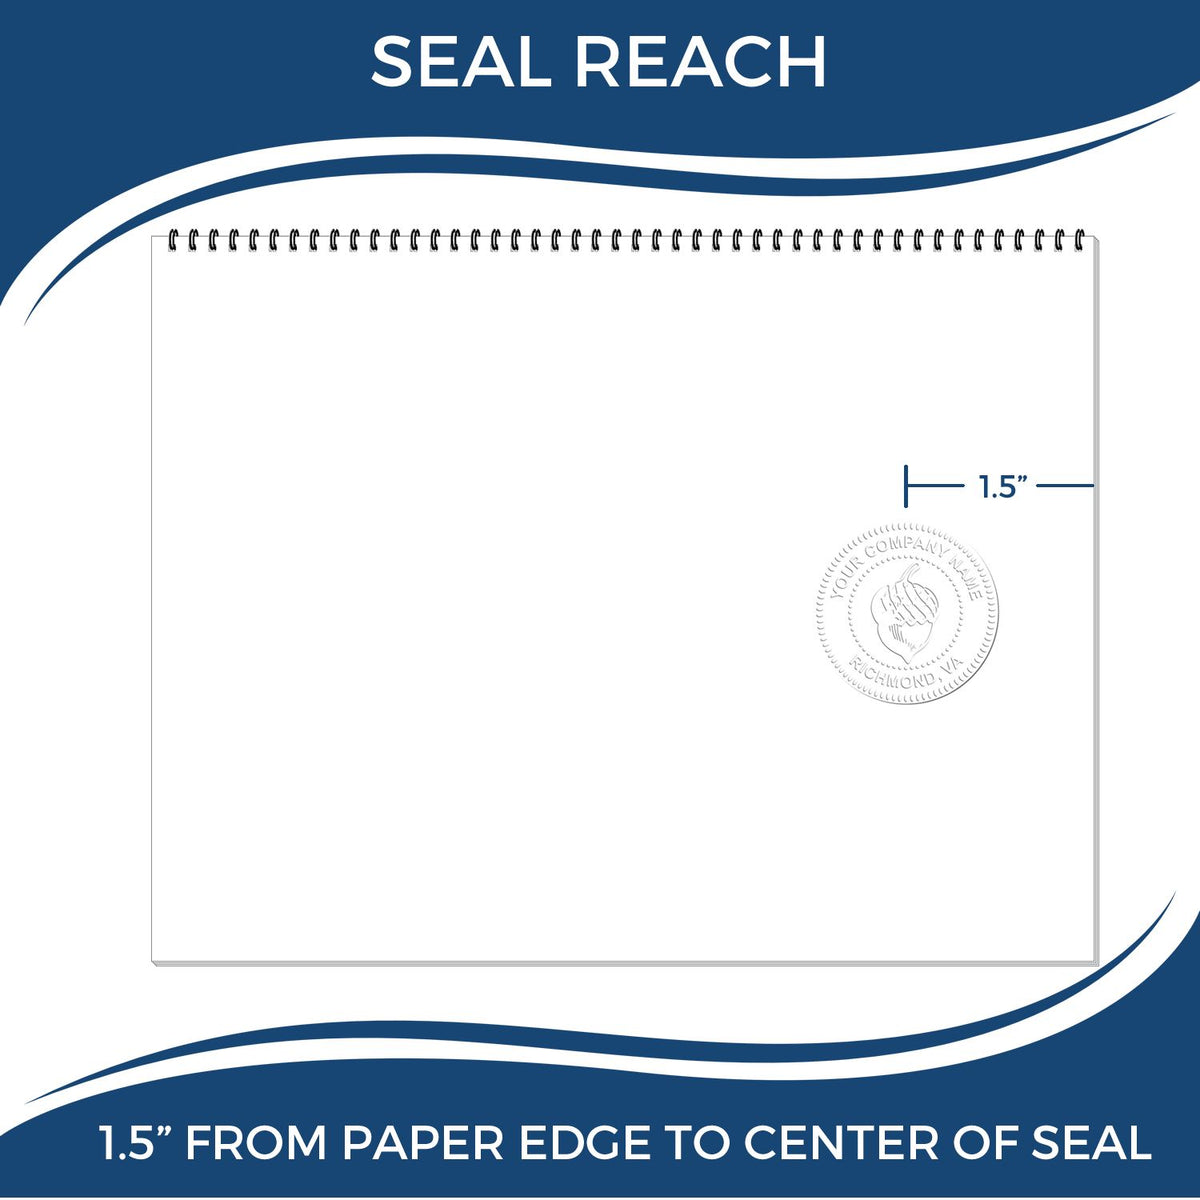 An infographic showing the seal reach which is represented by a ruler and a miniature seal image of the Gift Delaware Geologist Seal